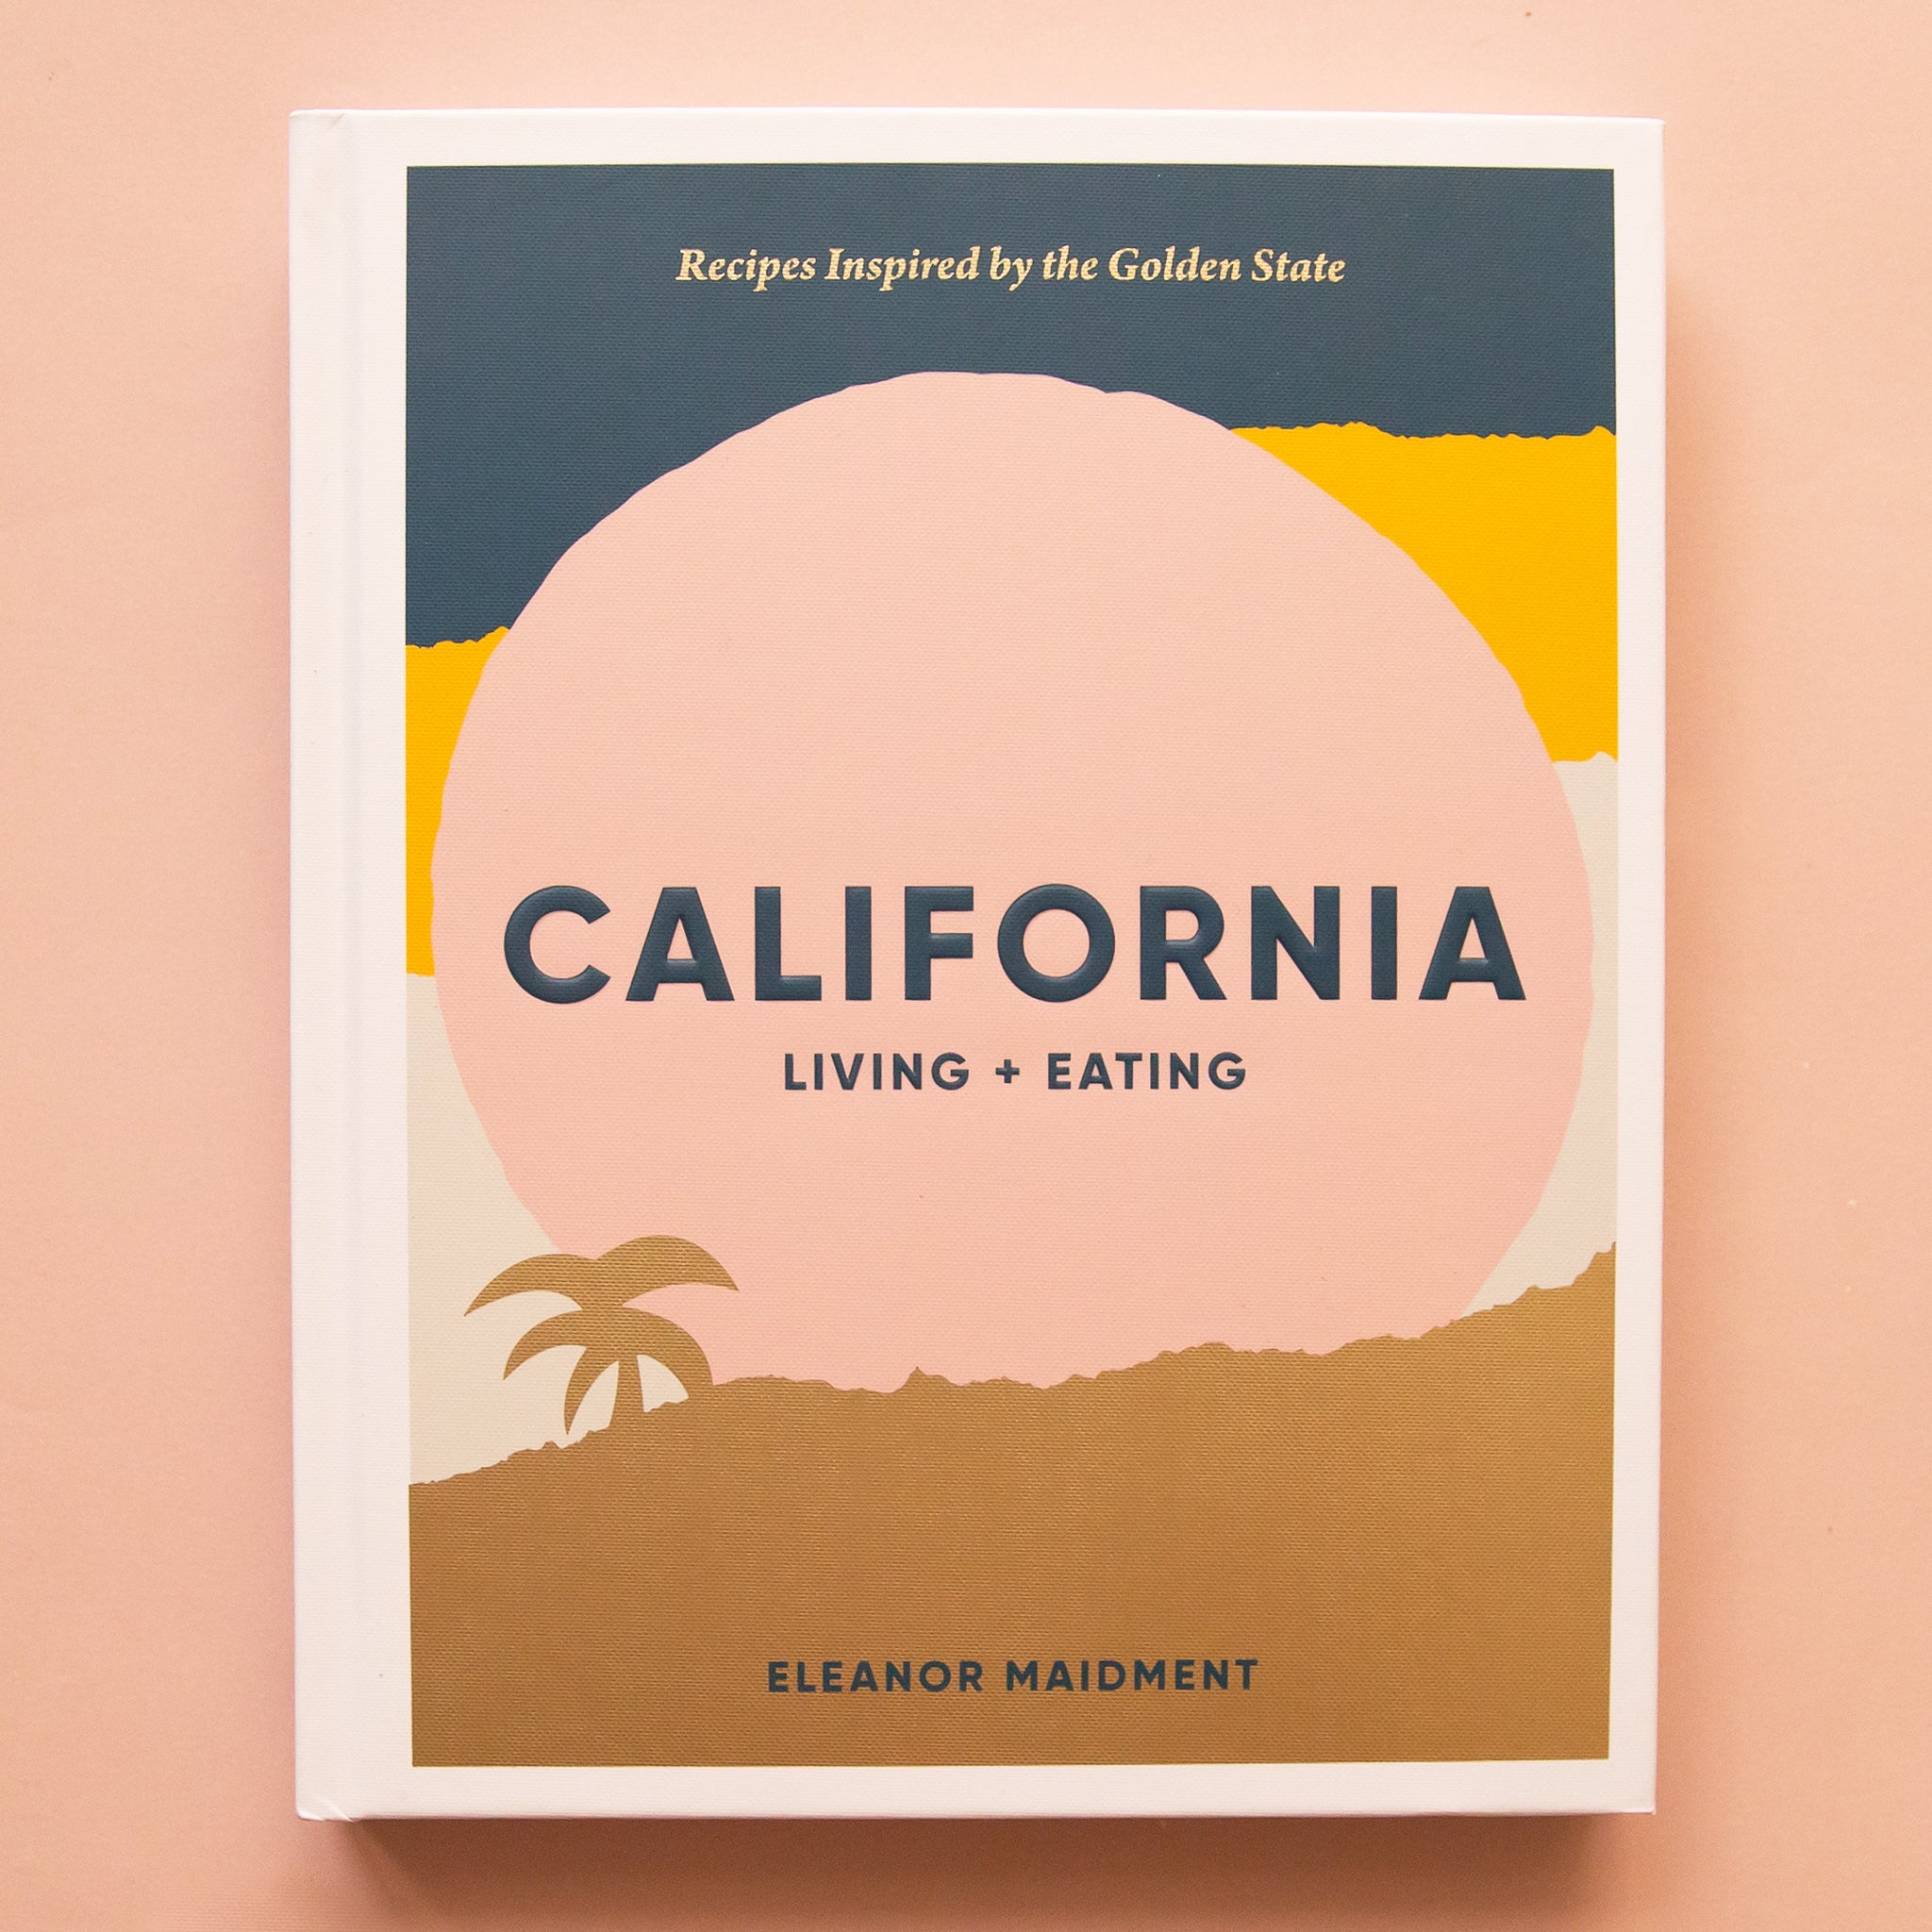 On a tan background is a blue, pink and yellow book cover with the title in the center that reads, "California Living + Eating". 